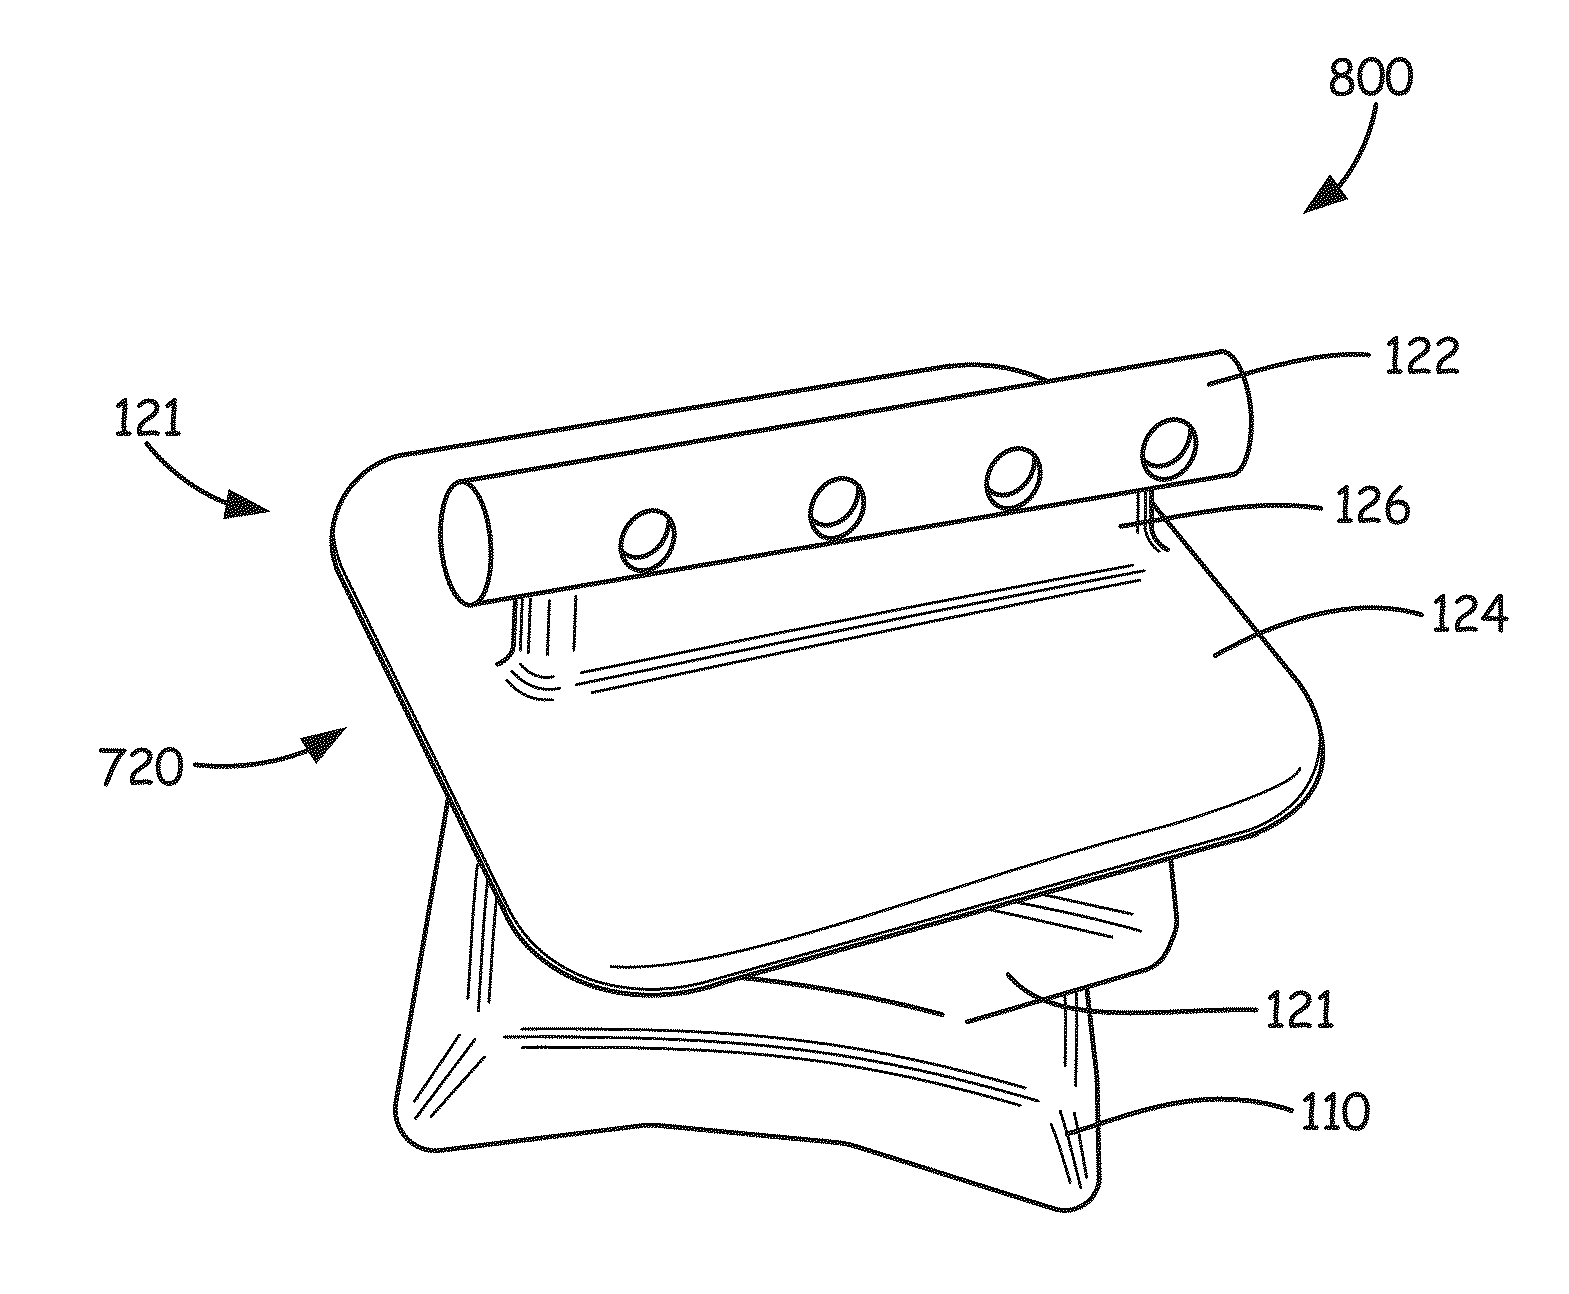 Improved ankle replacement apparatus and method